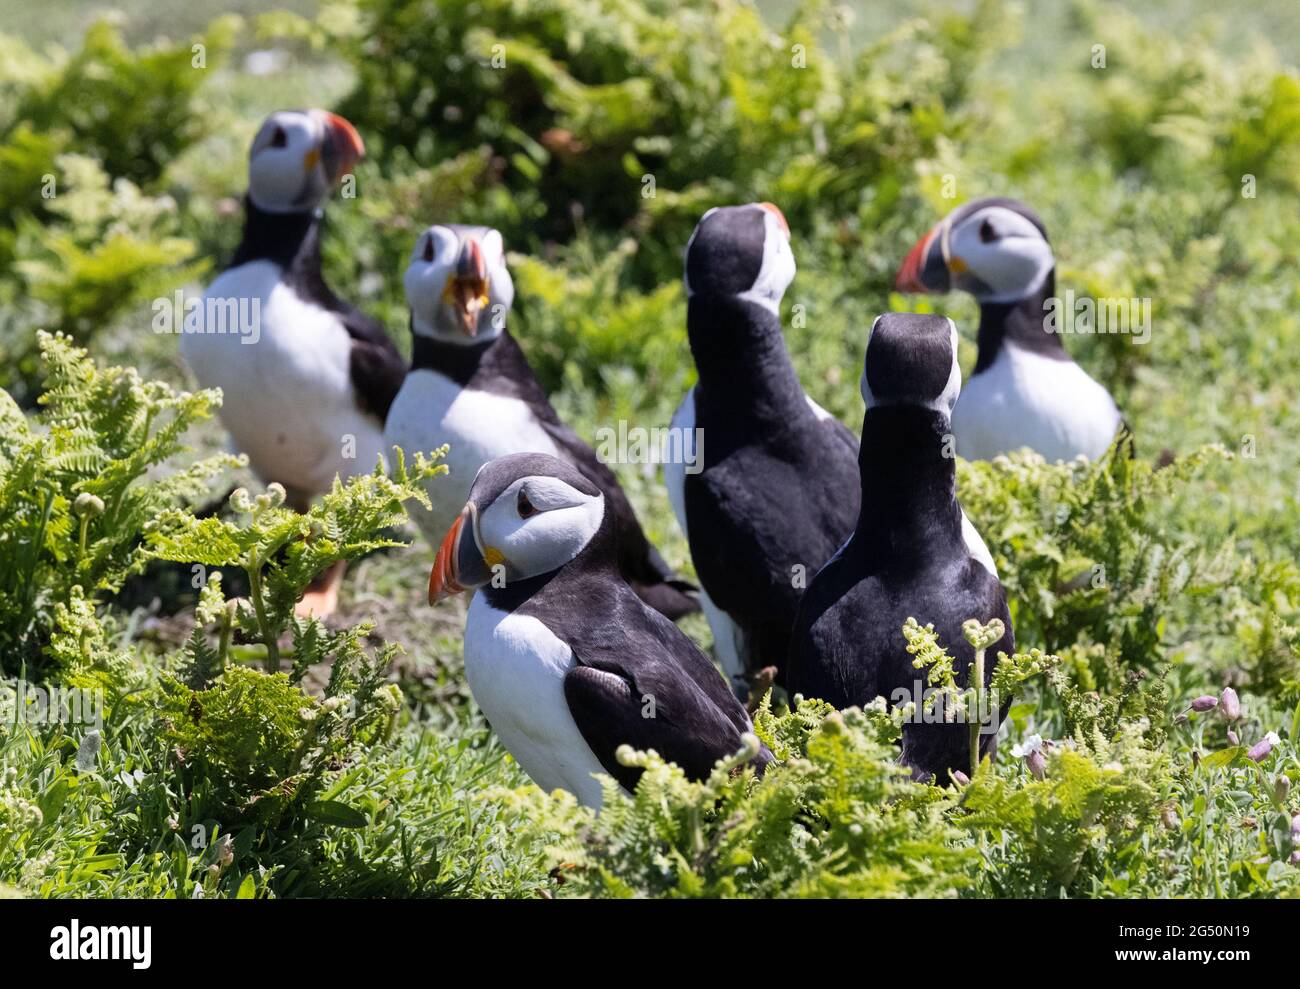 Puffin Skomer - a group of puffins, Fratercula arctica, on the ground, Skomer Island, Pembrokeshire Wales UK Stock Photo